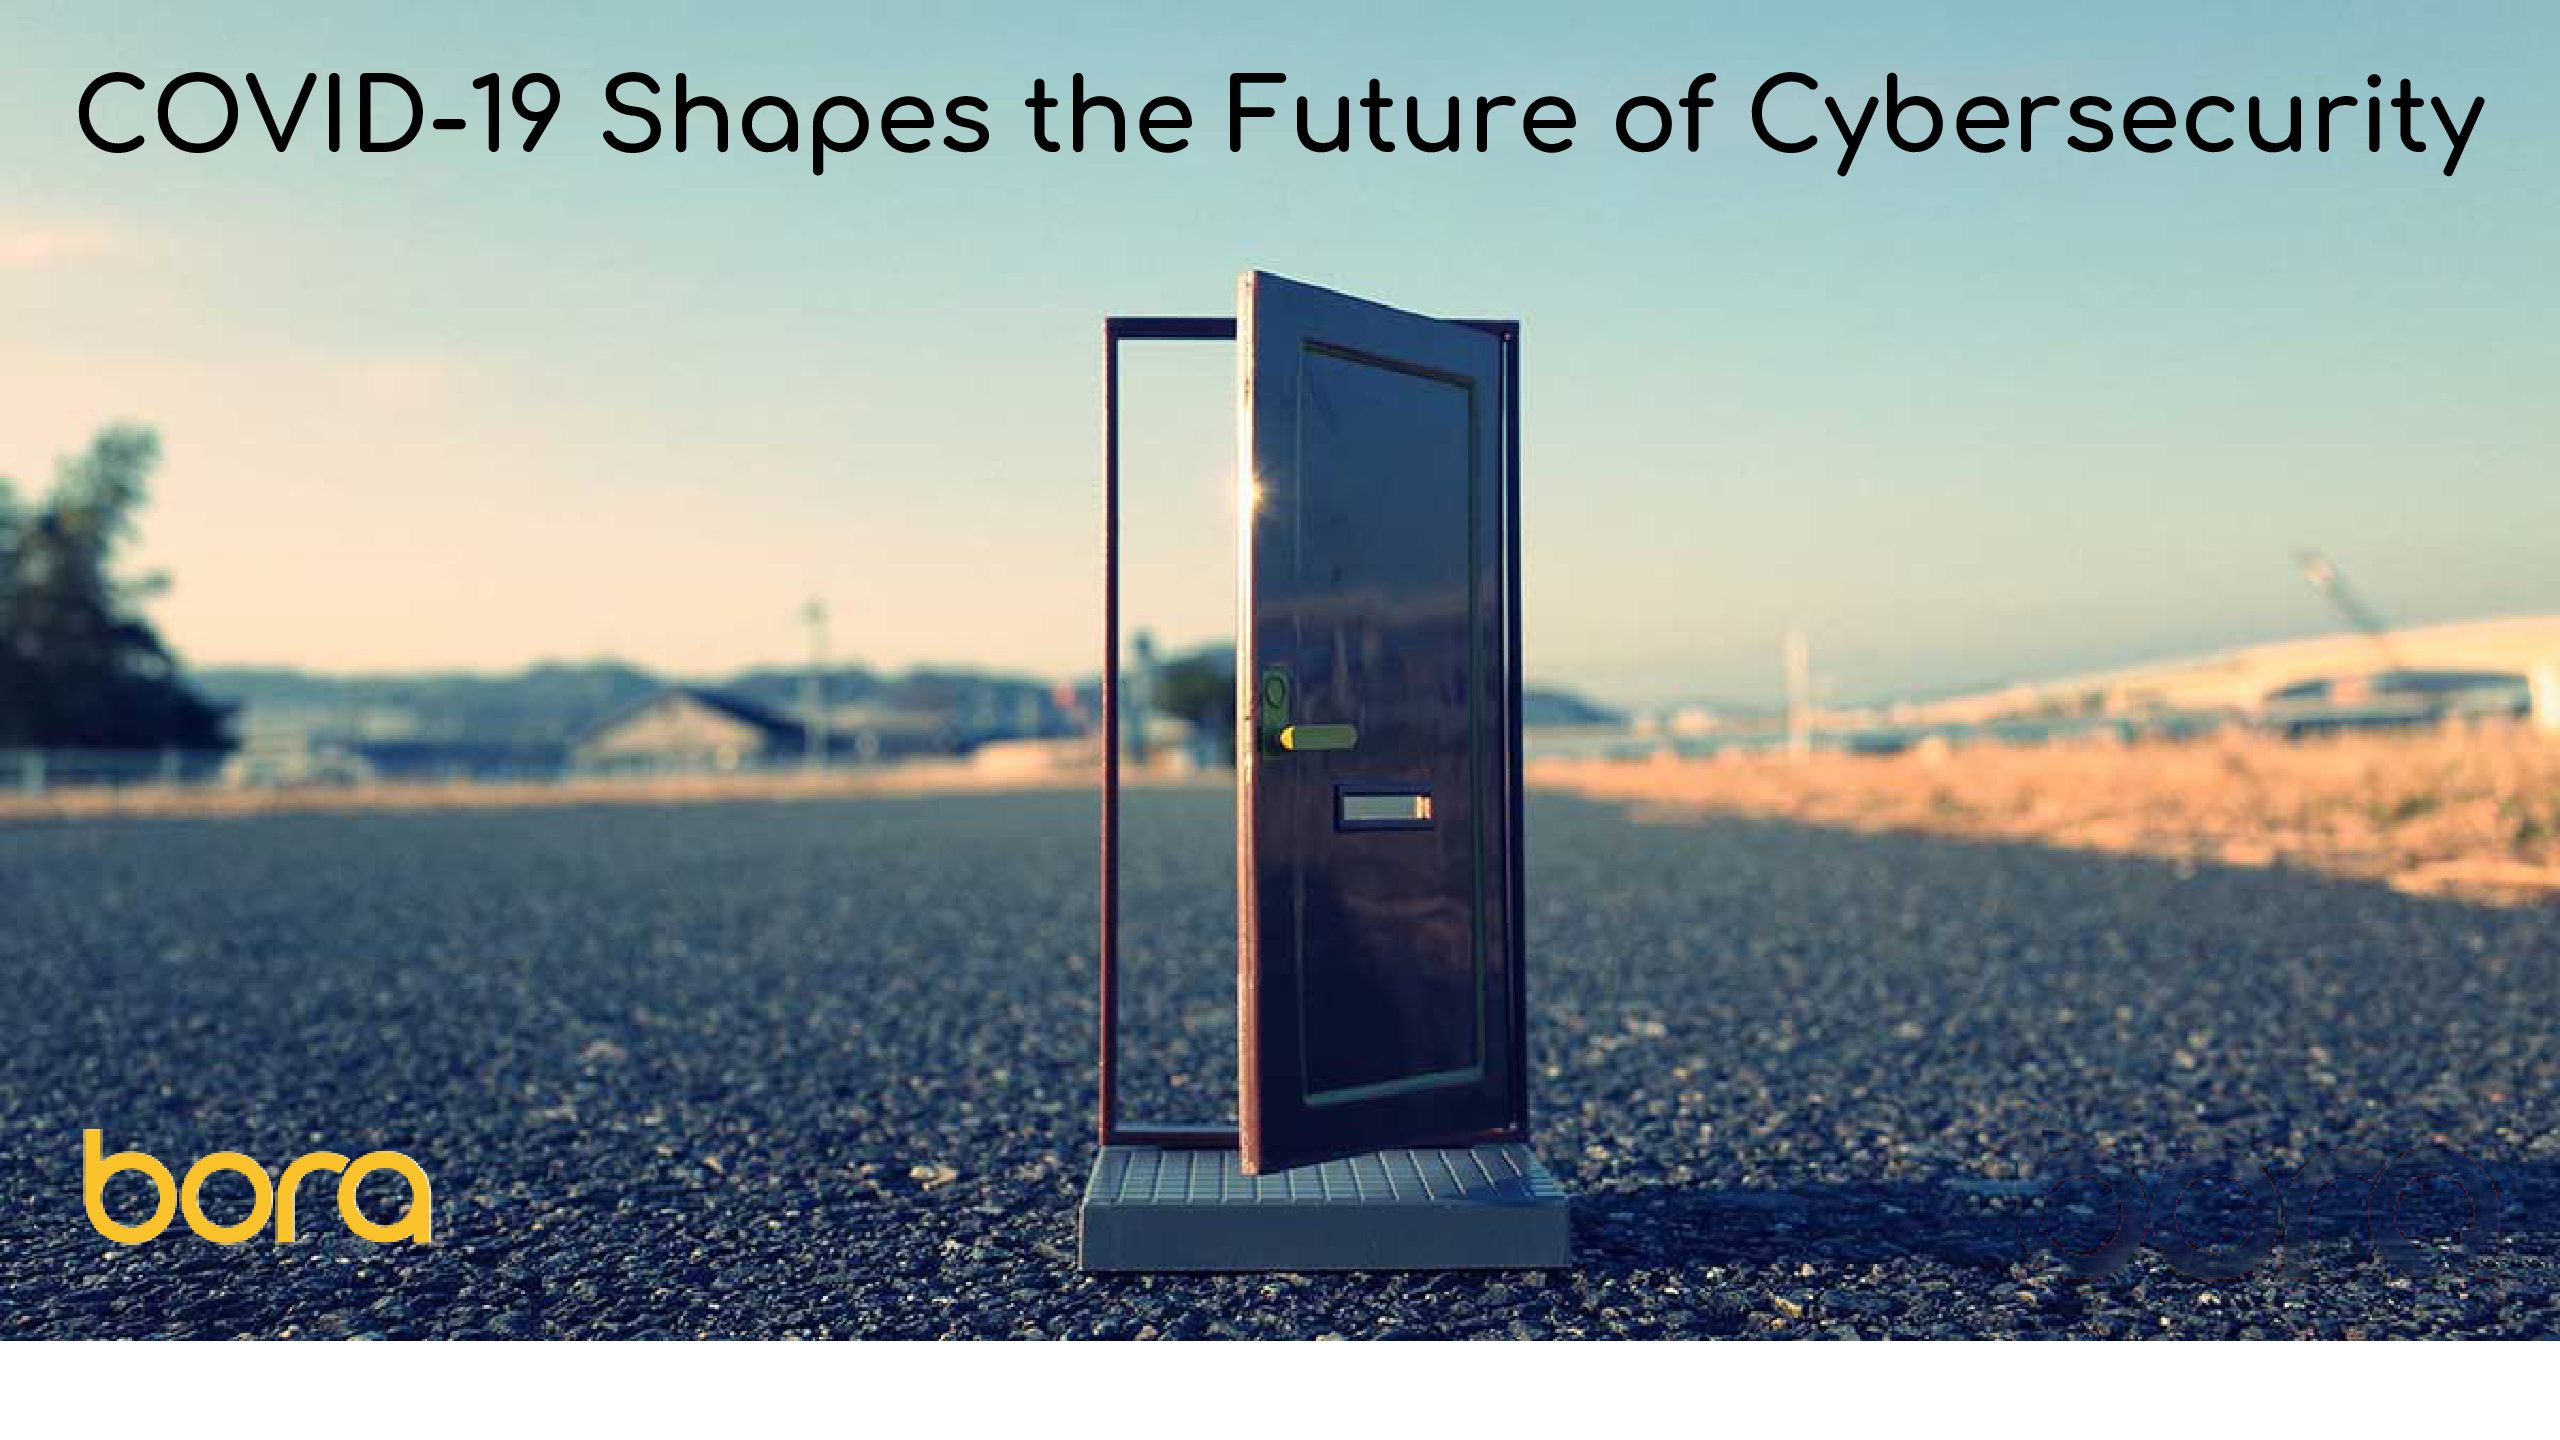 COVID-19 Shapes the Future of Cybersecurity